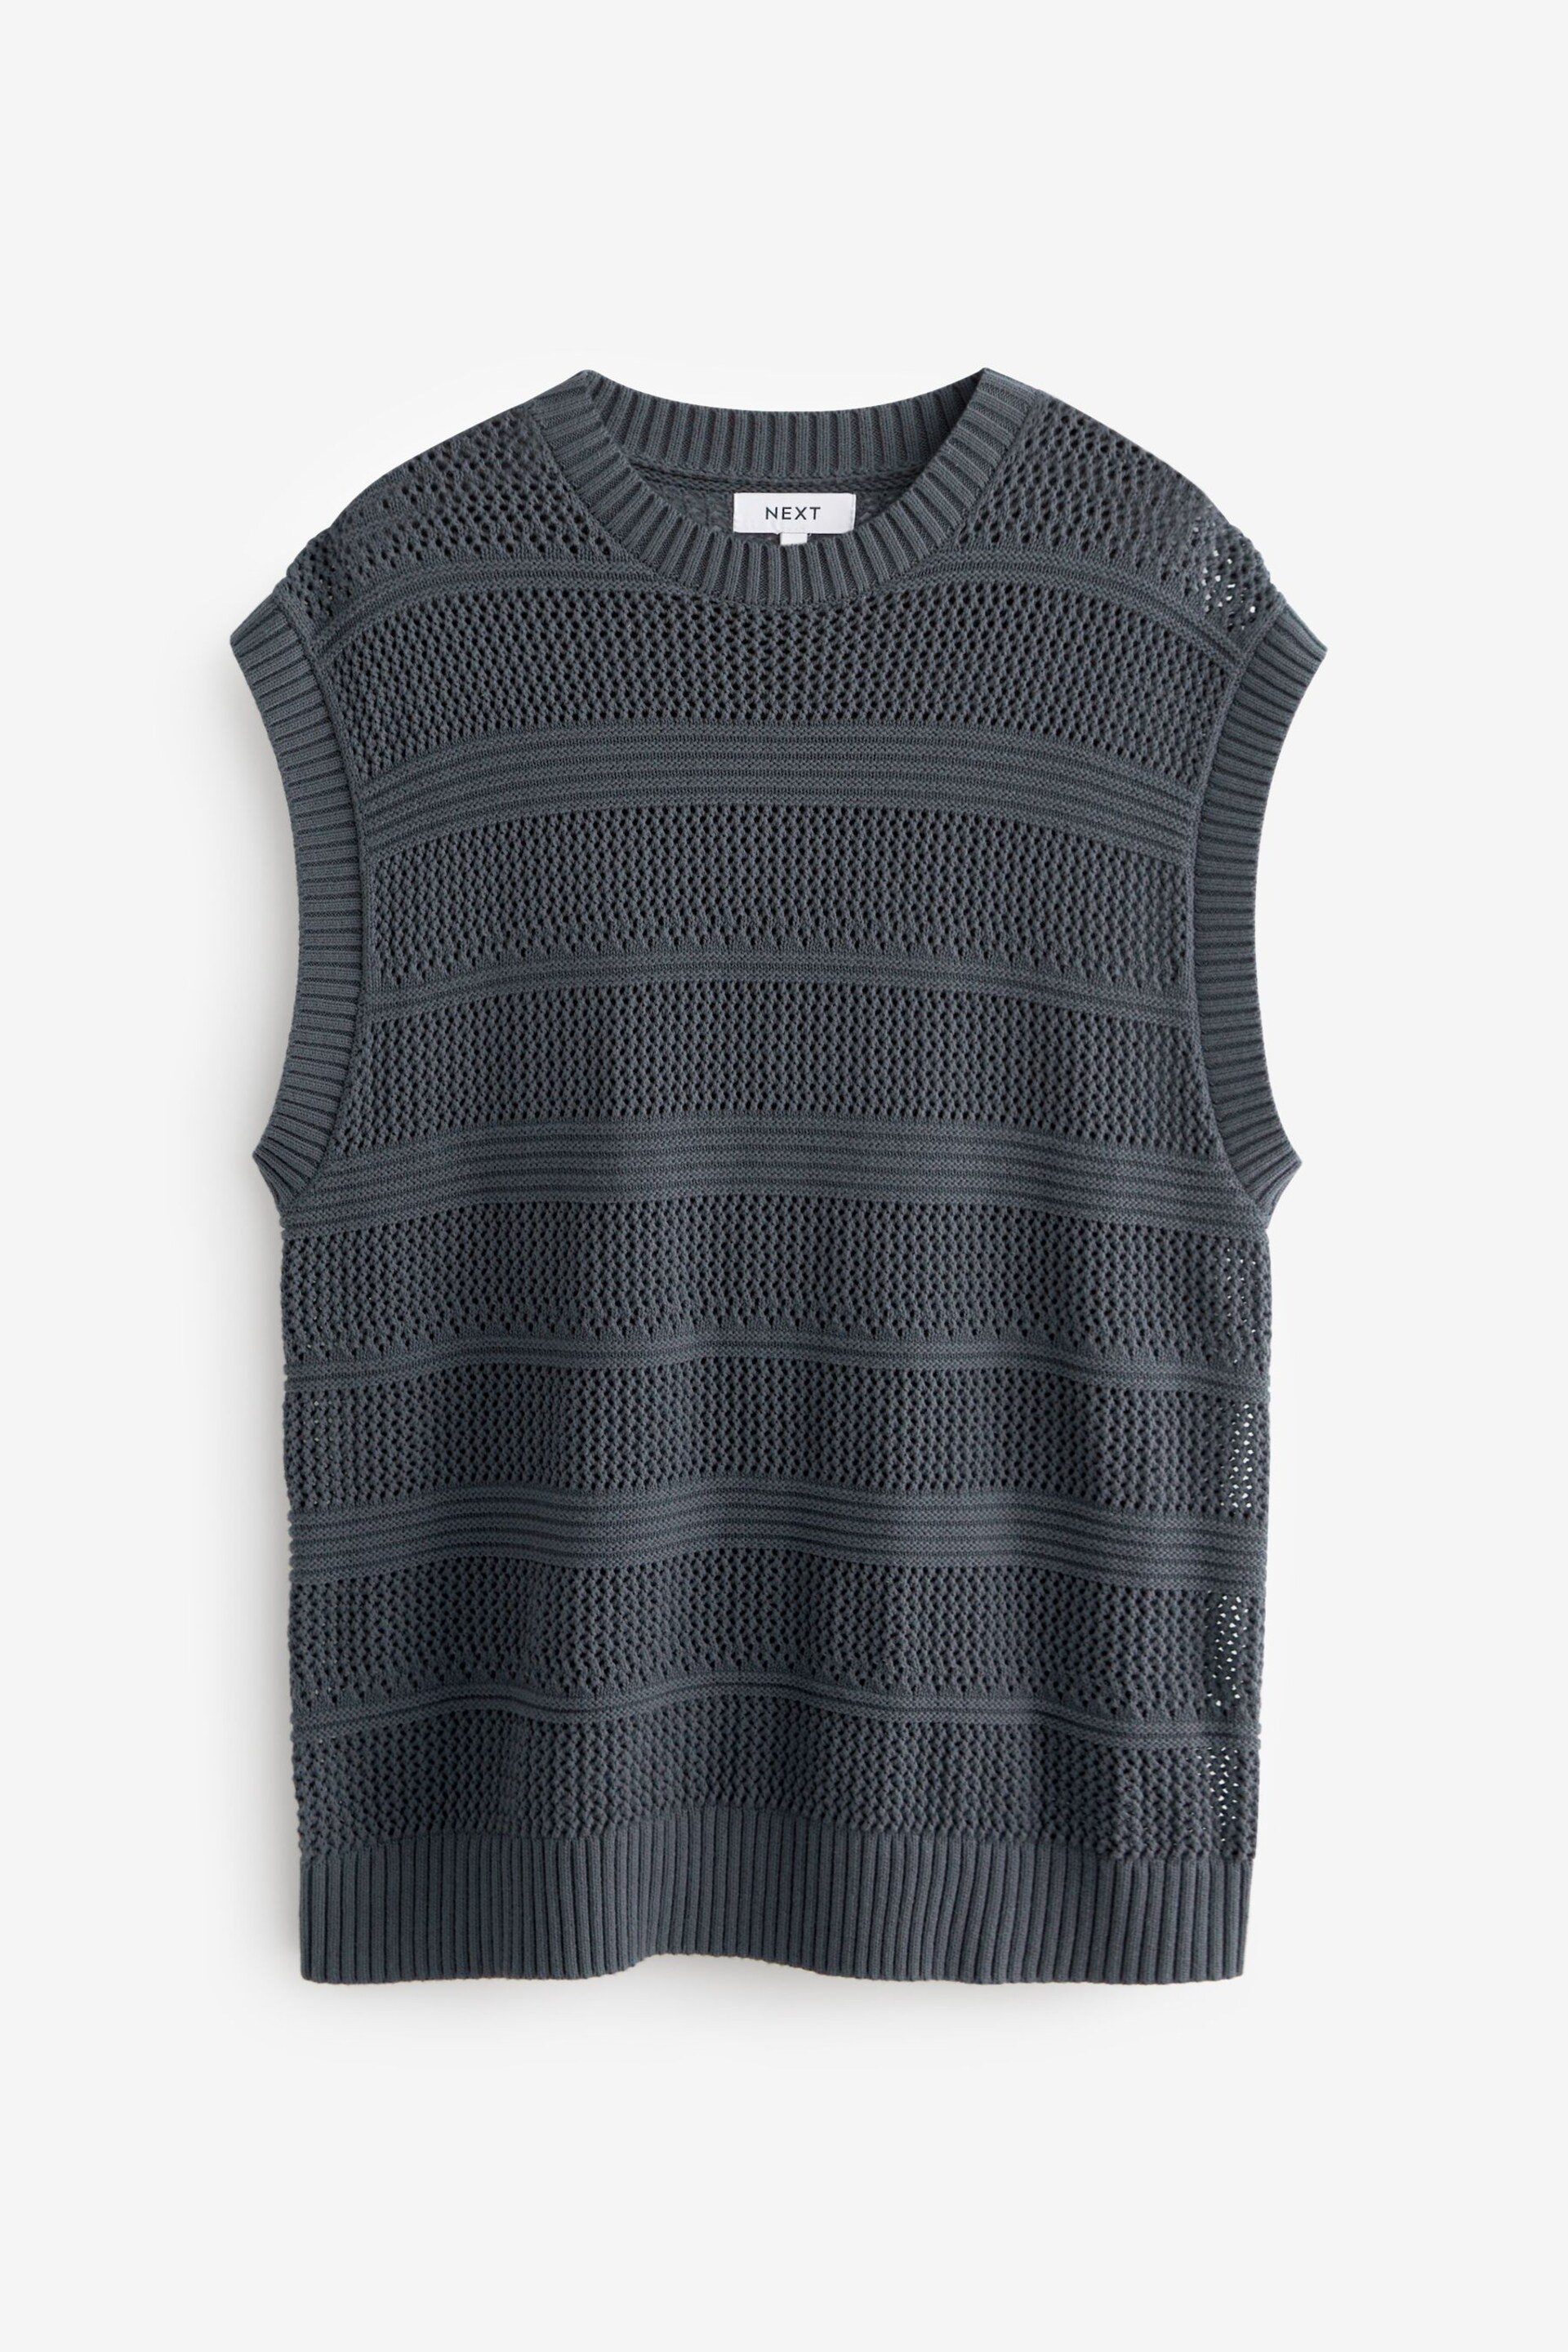 Charcoal Grey Knitted Crochet Regular Fit Tank - Image 5 of 7